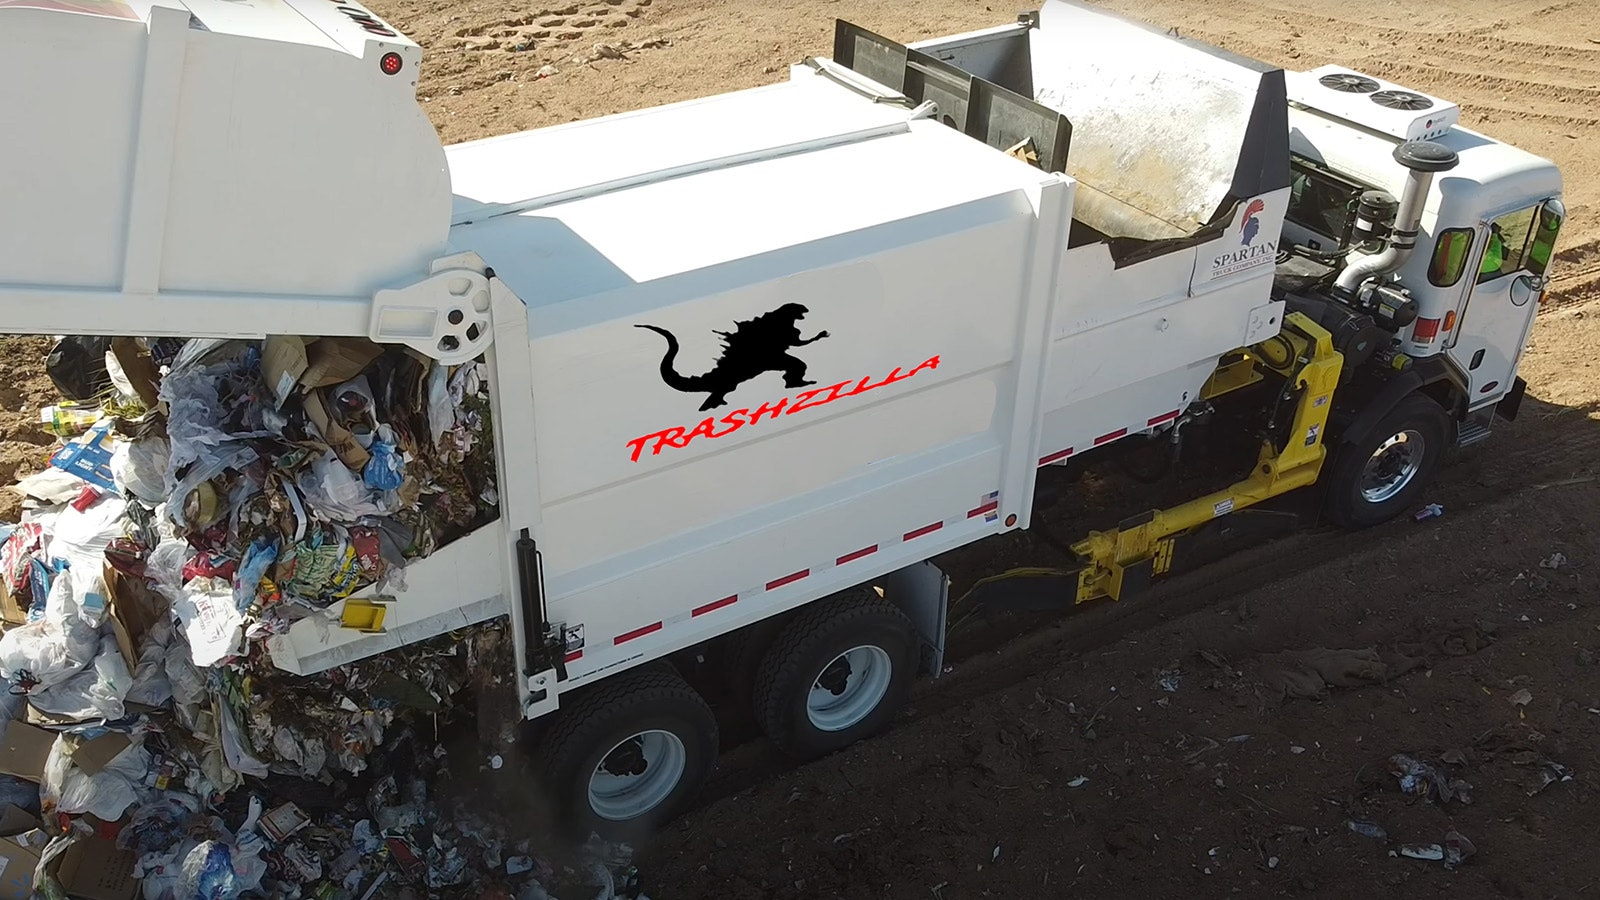 Students at Lakeview Elementary School in Gillette came up with the name "Trashzilla" for one of the city's garbage trucks.